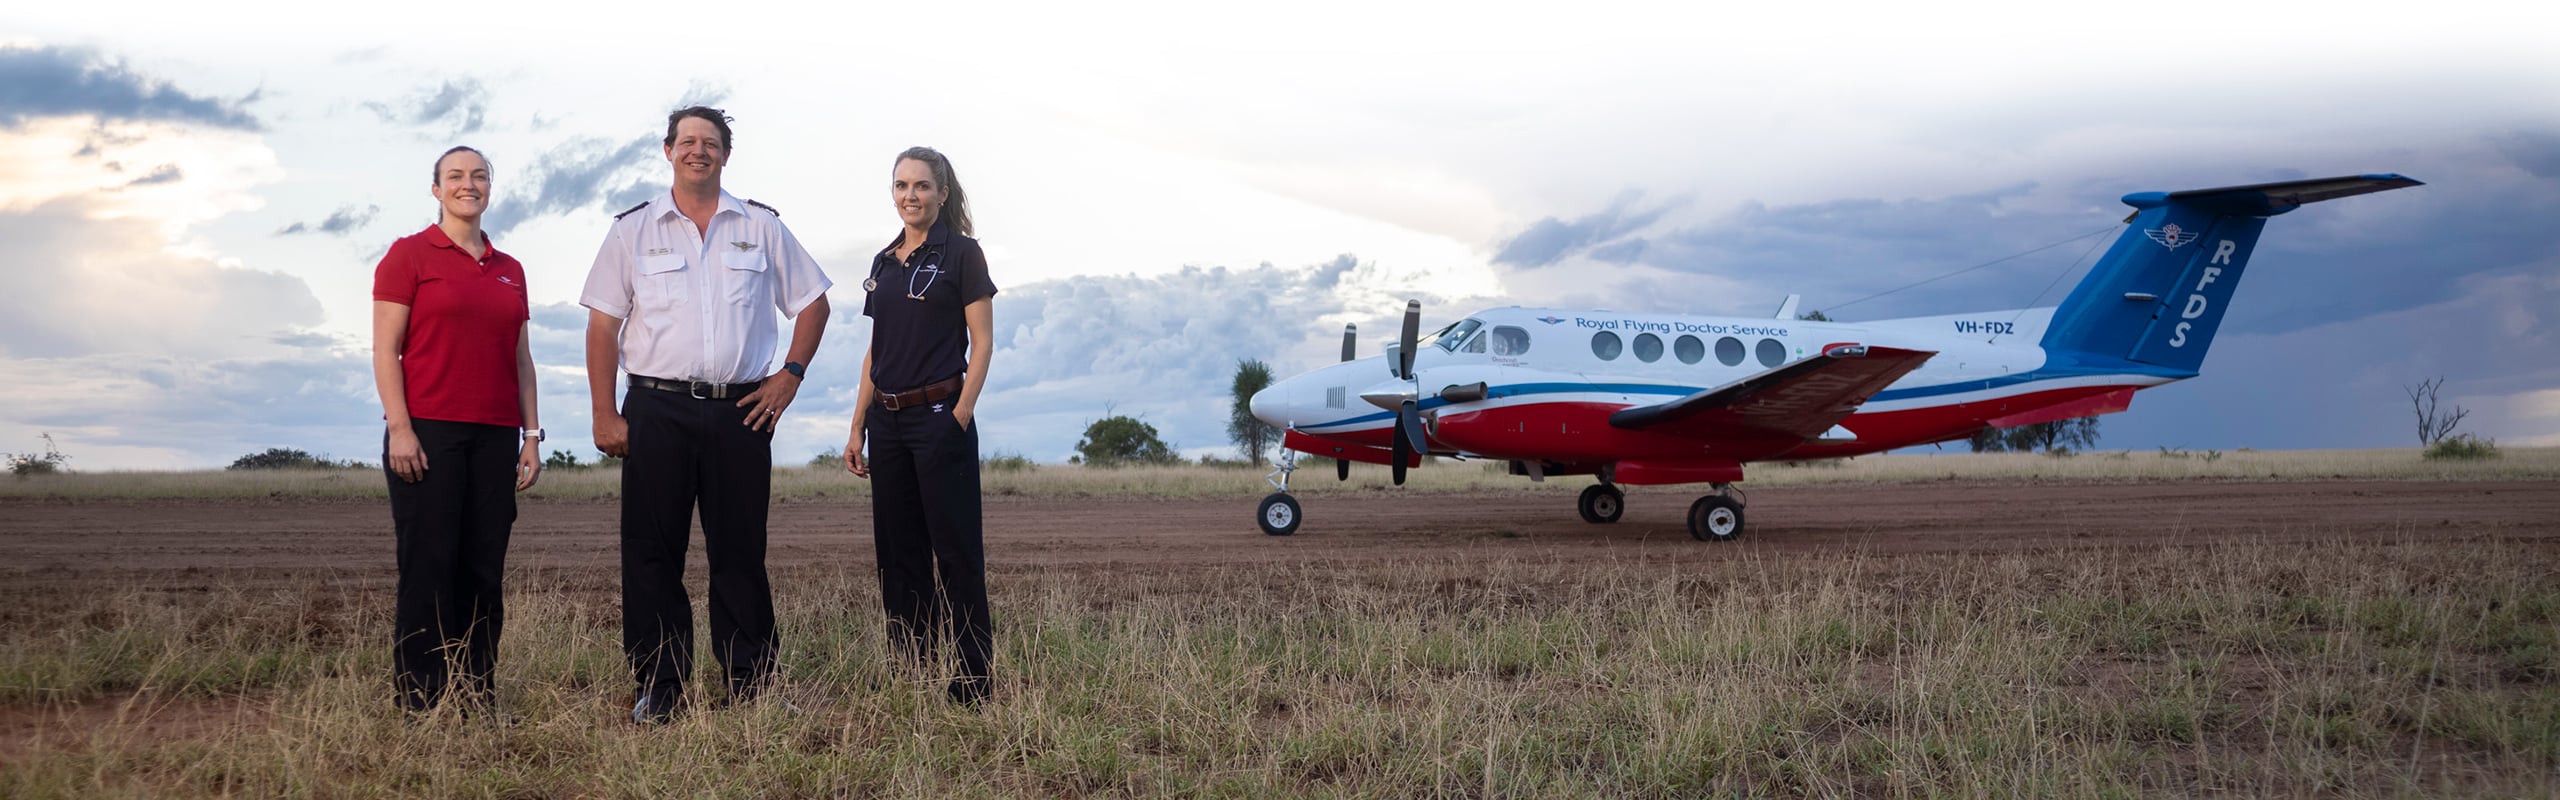 Royal Flying Doctor Service Pilot, Doctor and Nurse standing with an RFDS Aircraft in the background